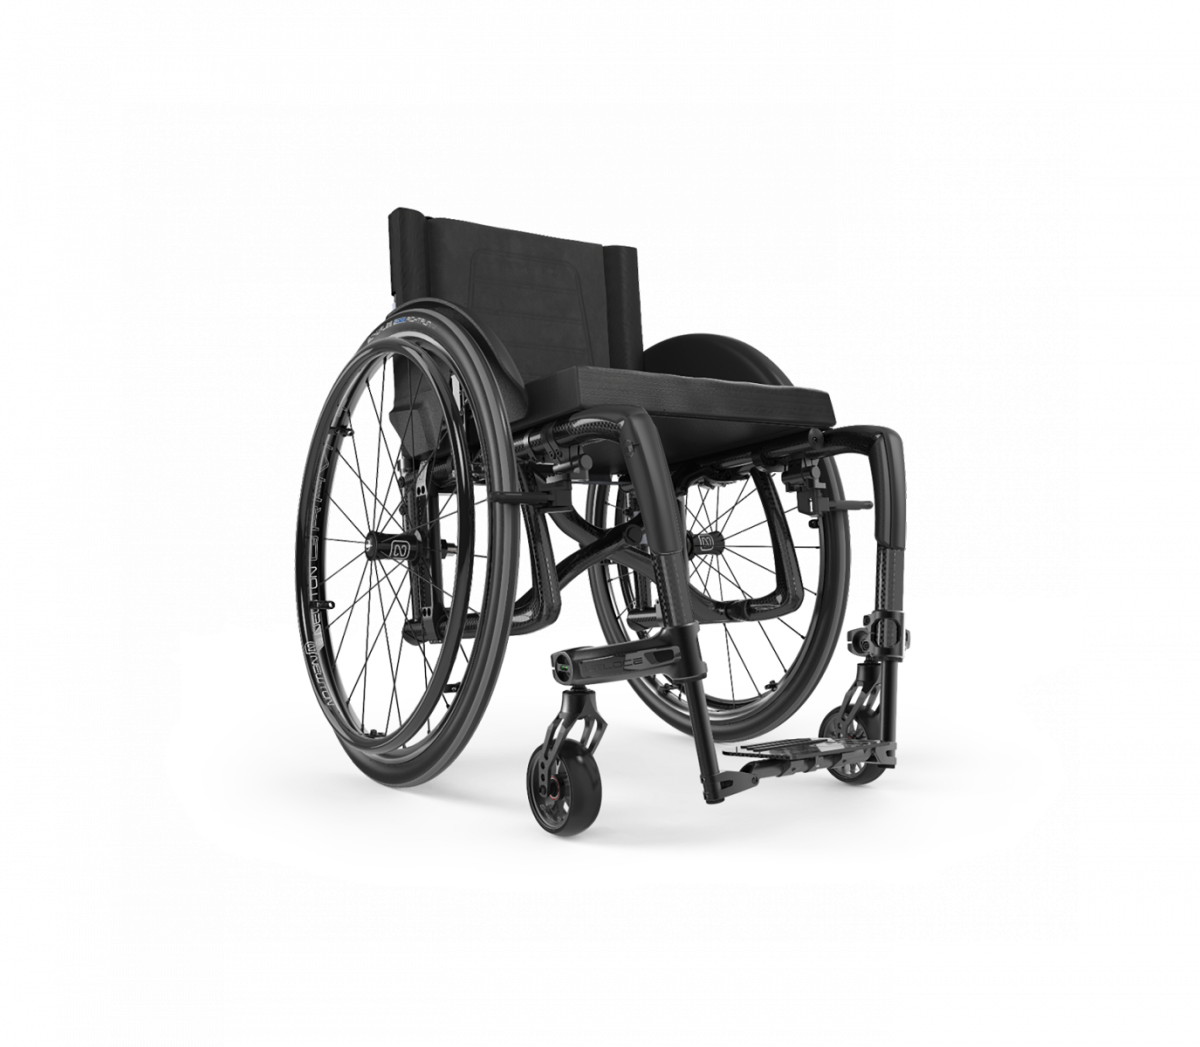 Veloce Carbon Folding Wheelchair in black